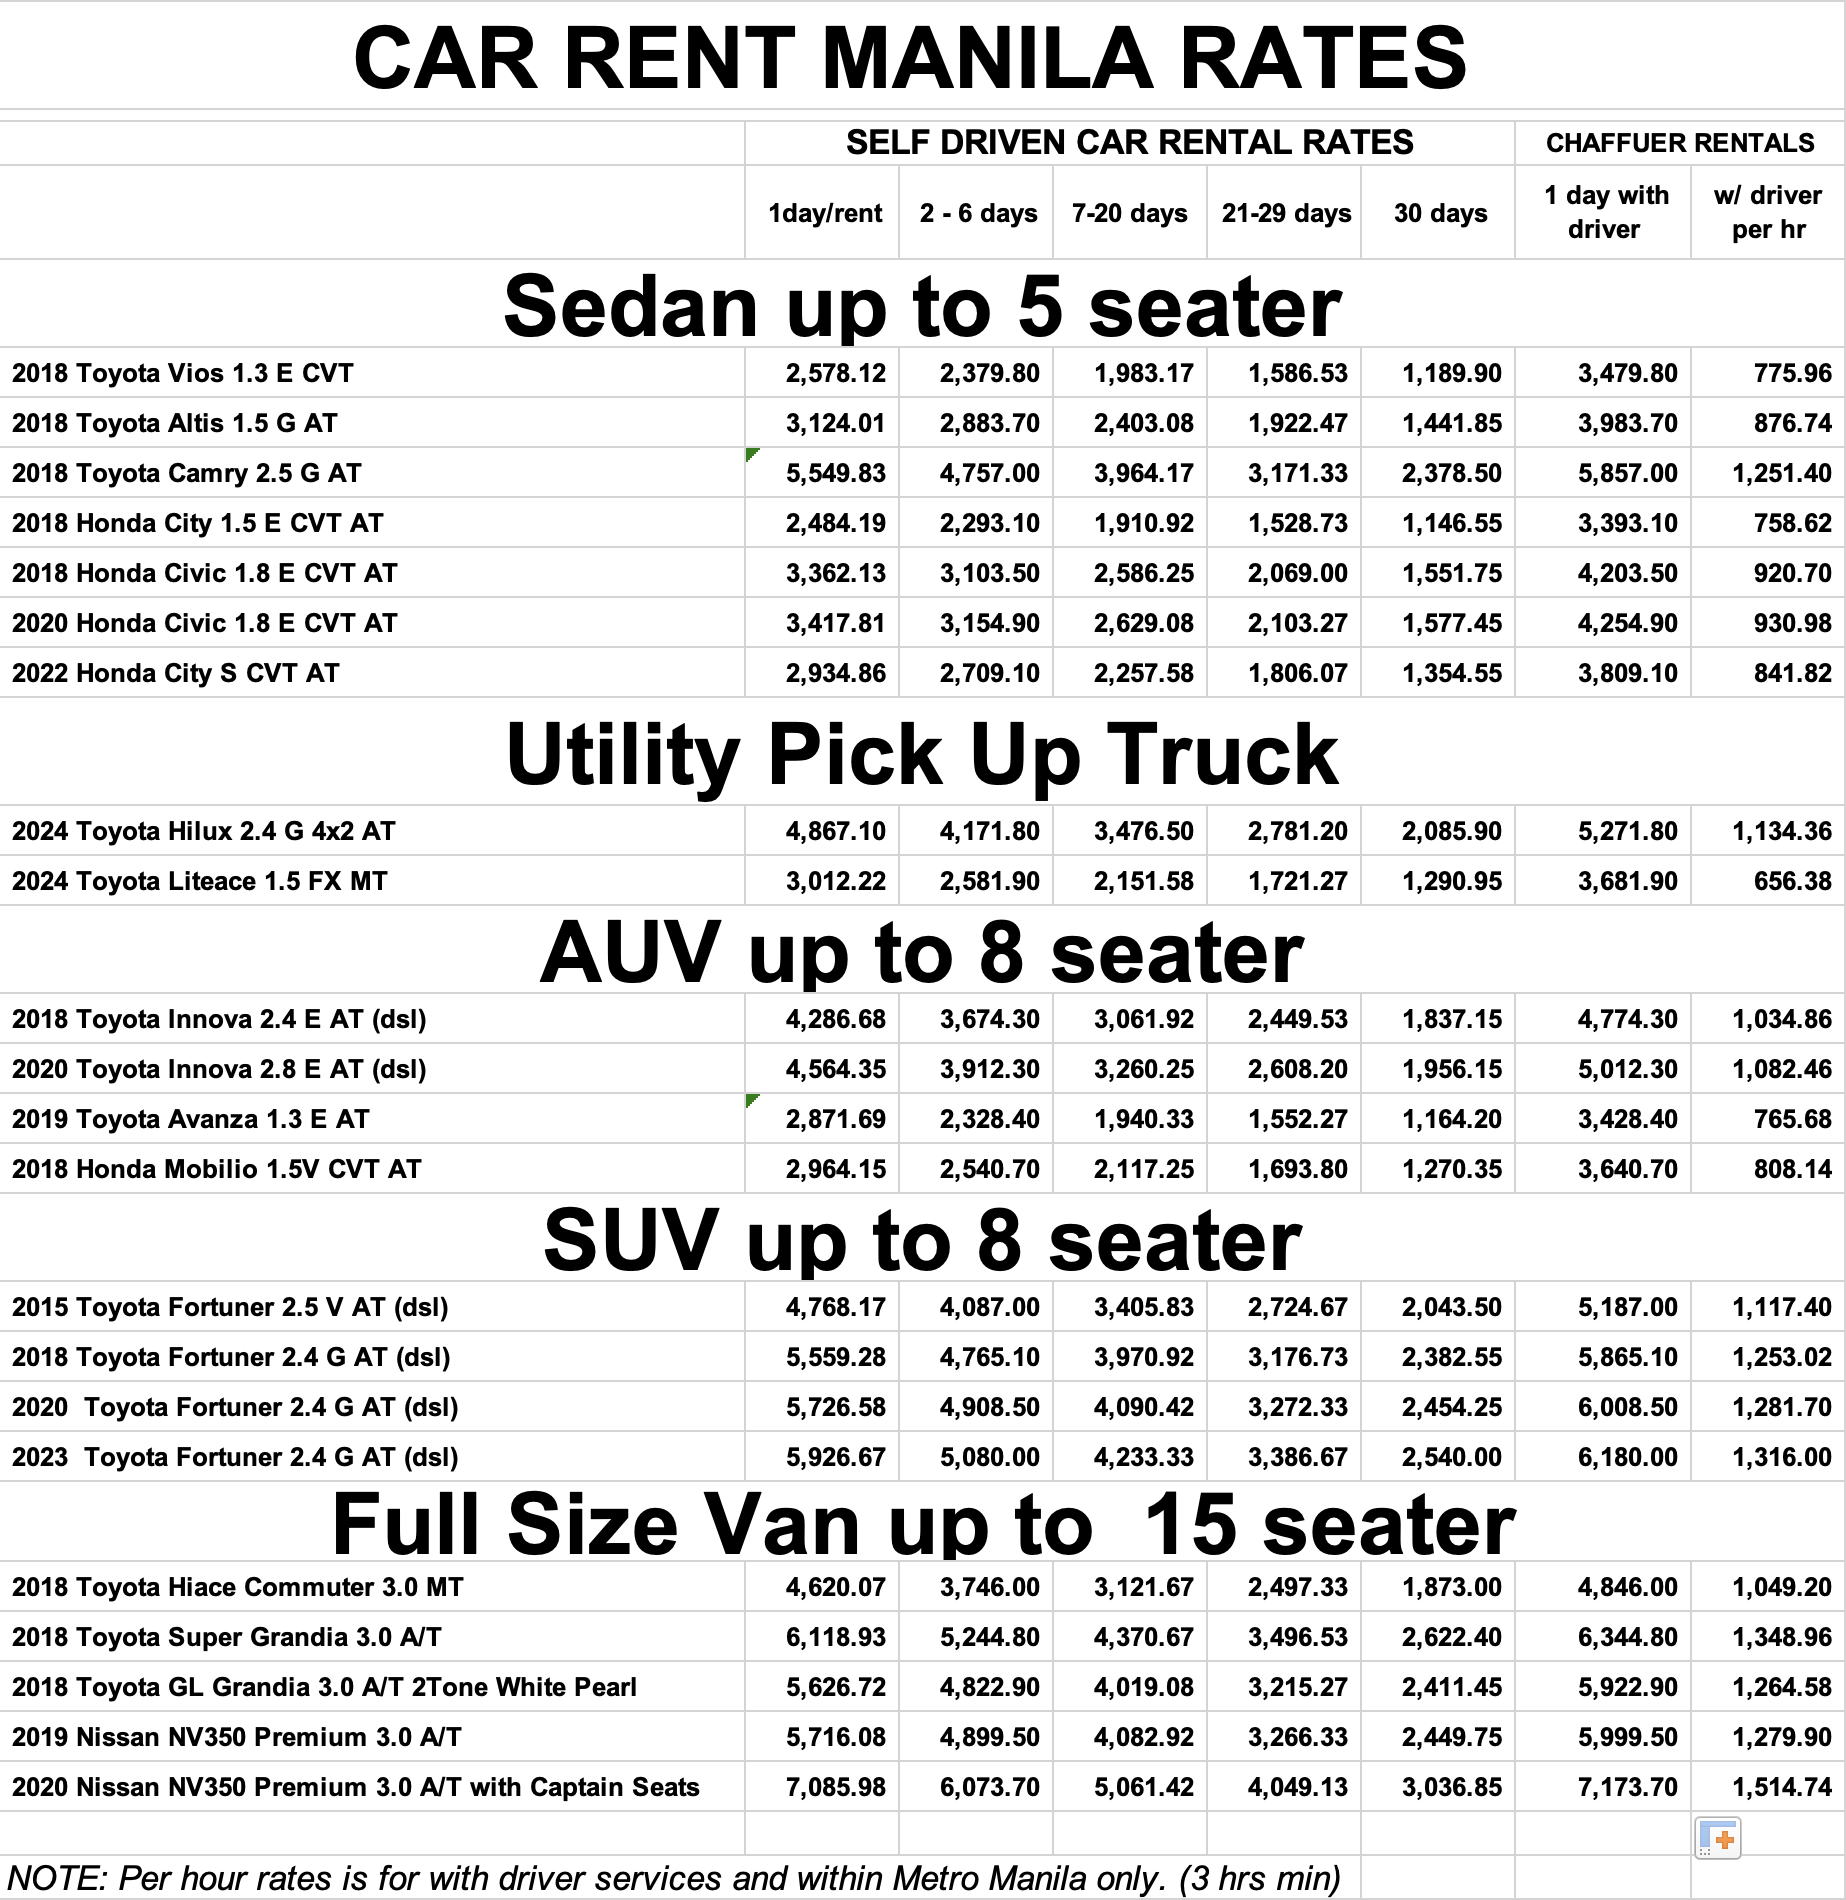 cheapest and most affordable car rental rates manila self drive, with driver, car lease and van hire